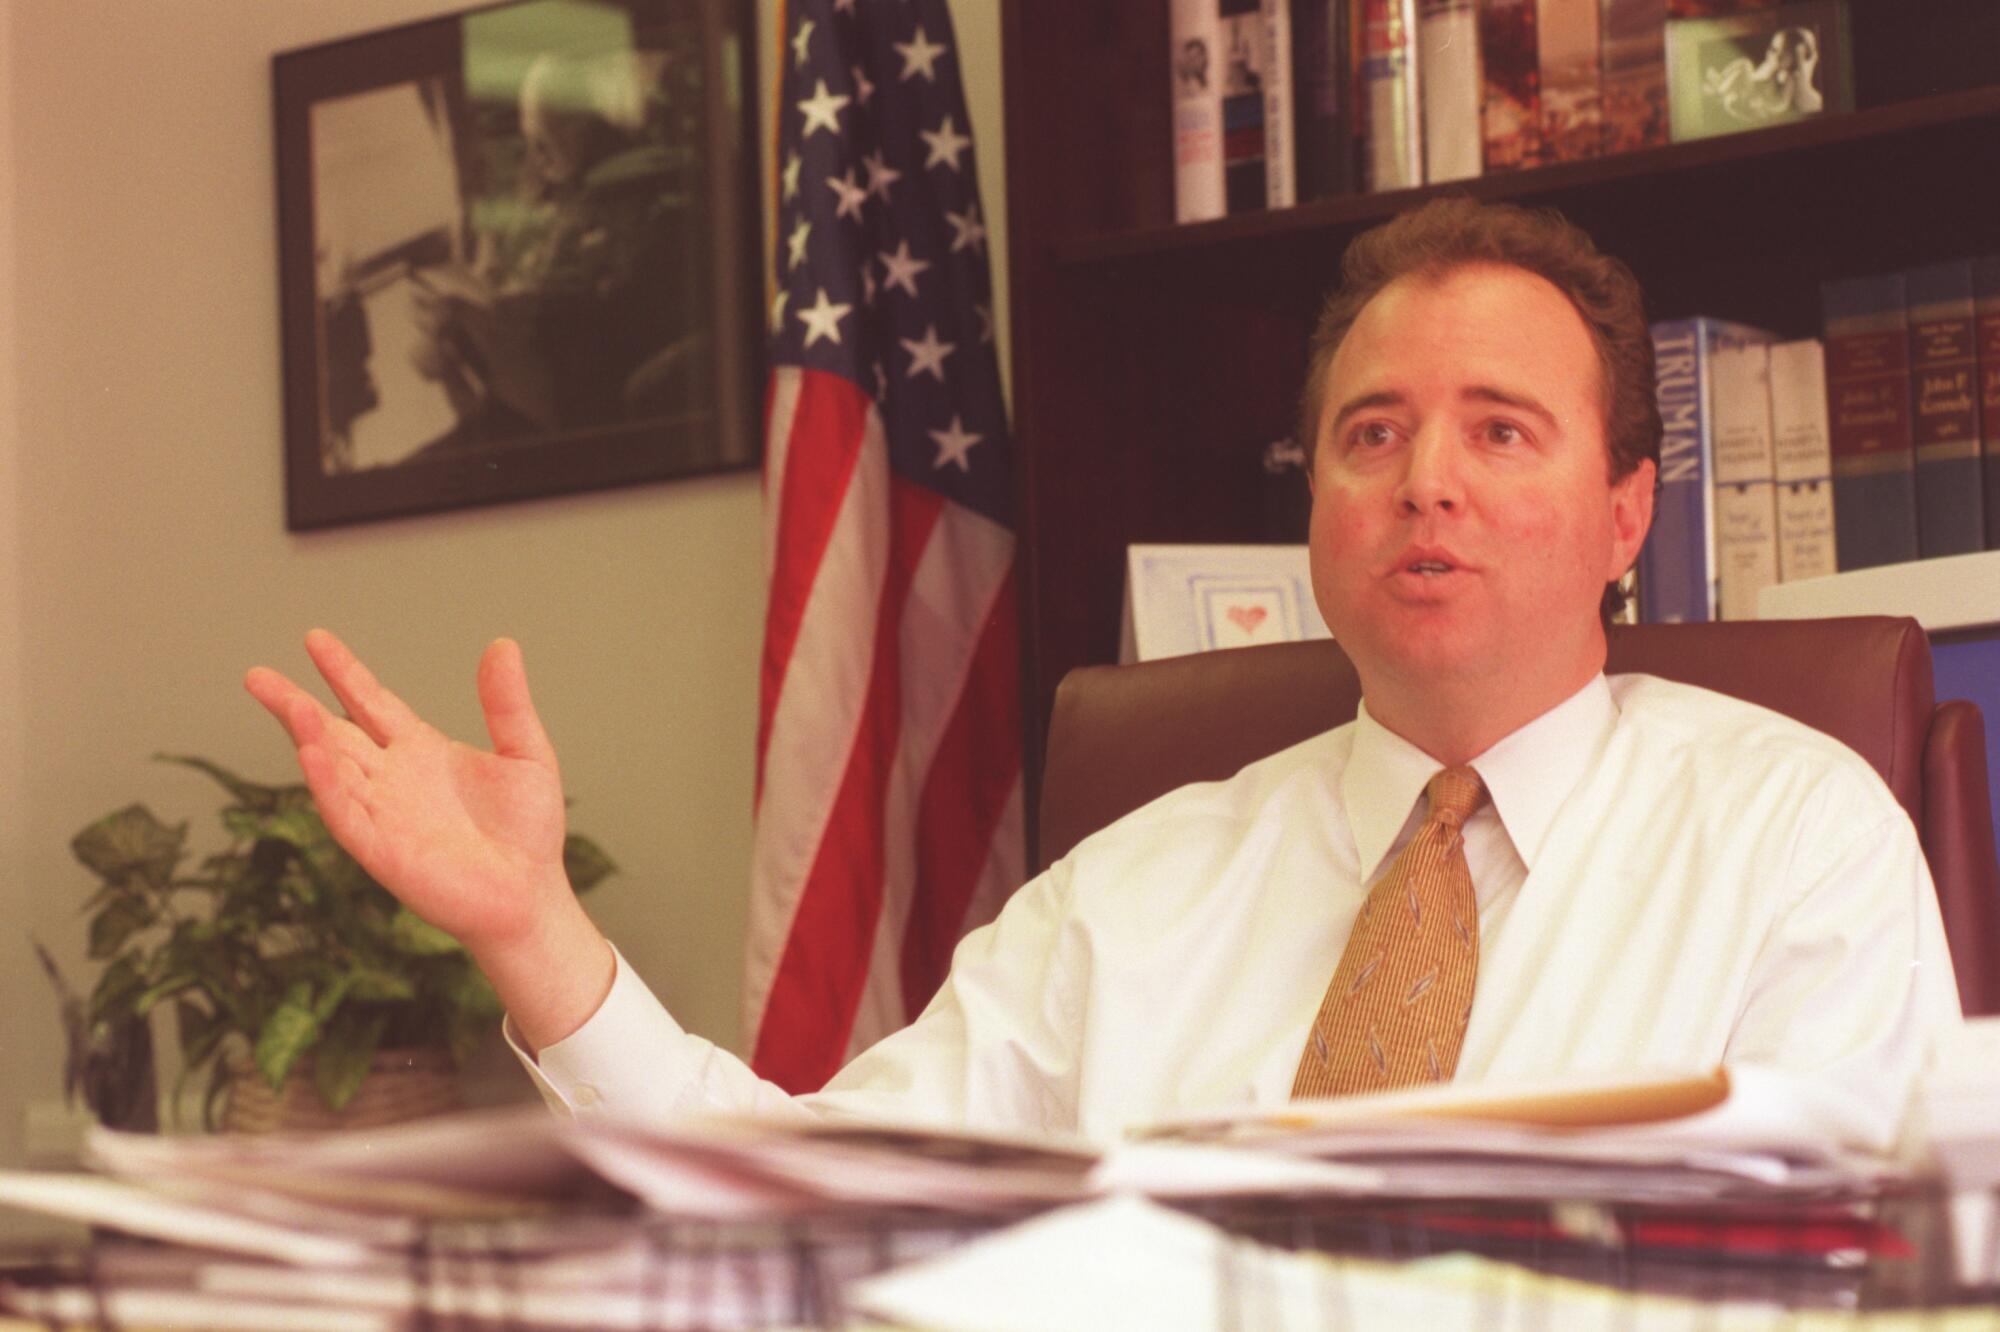 Adam Schiff gestures as he speaks from behind a desk piled with paperwork, a bookcase and American flag behind him